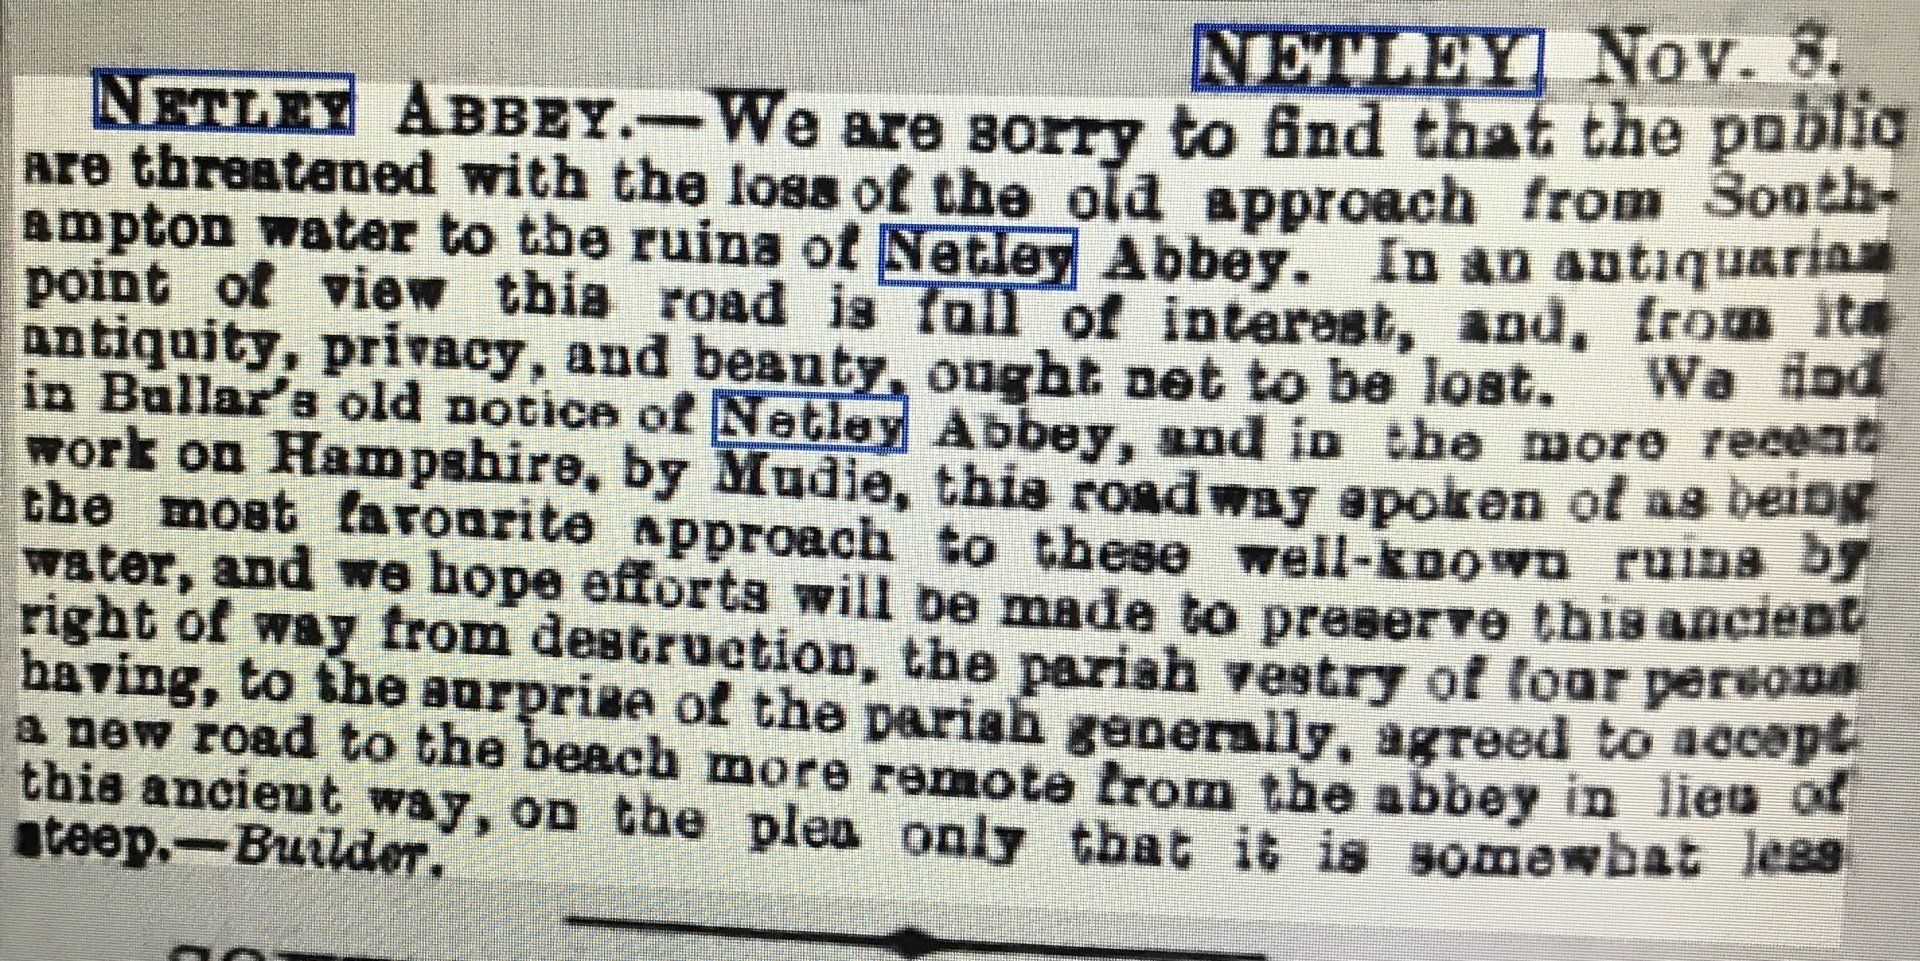 Road down to the sea at Netley Abbey closed off in 1876